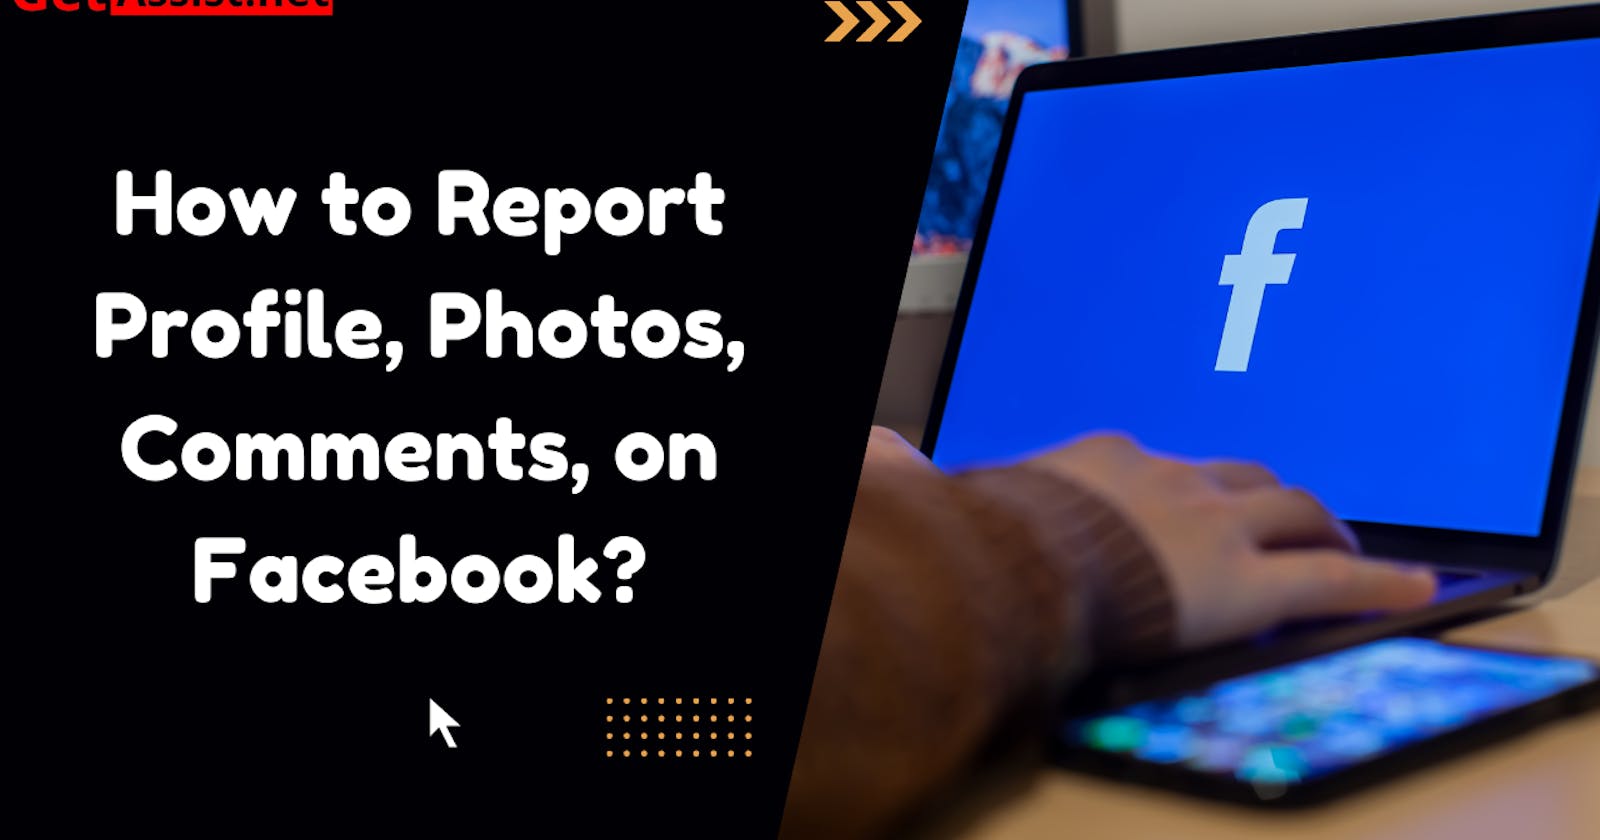 How to Report Profile, Photos, Comments, on Facebook?